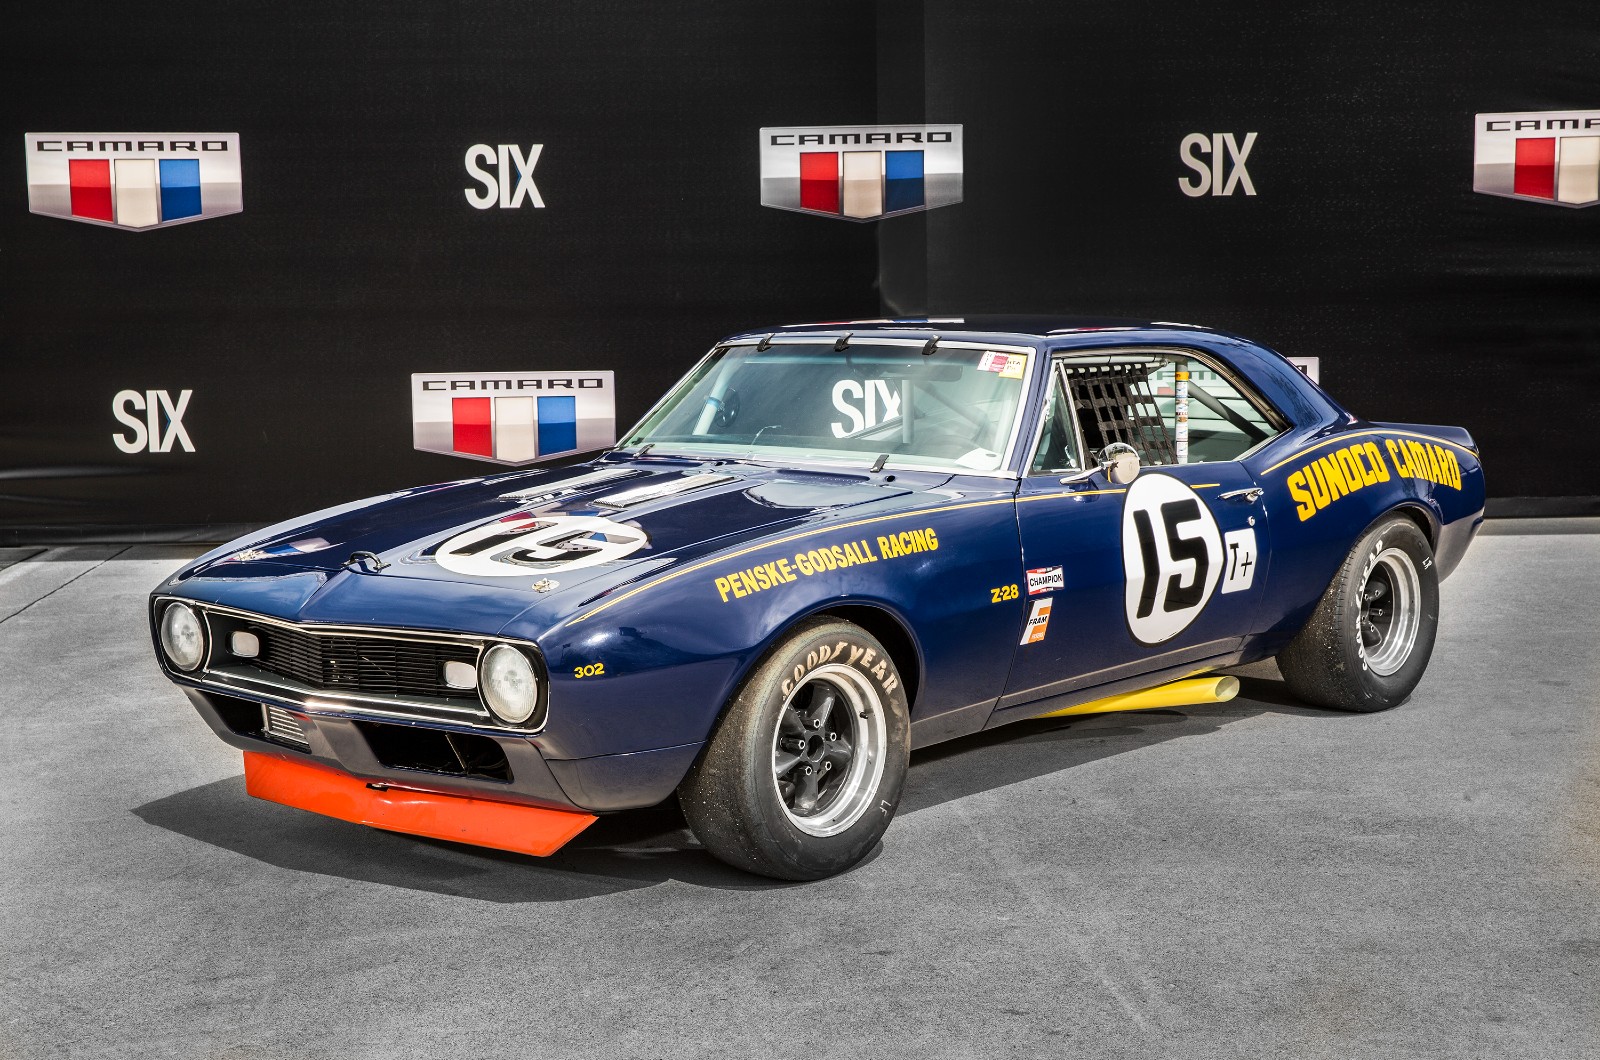 <p>The 1967 Chevrolet Camaro Z/28 was made to compete in the SCCA Trans-Am series, and was designed with a solid-lifter 4.9-liter V8, 4-speed transmission, power disc brakes, and distinctive “skunk” stripes. With the Z/28, Chevy had the Ford Mustang and the Mercury Cougar directly in its cross-hairs.</p><p>The model secured notable victories in the 1968 and 1969 Trans-Am Championships, including a 1st in class at the 1968 12 Hours of Sebring. The Camaro Z/28 boosted Chevrolet’s competitive standing against Ford, helping to elevate the Trans-Am series into a classic Chevy versus Ford rivalry.</p>